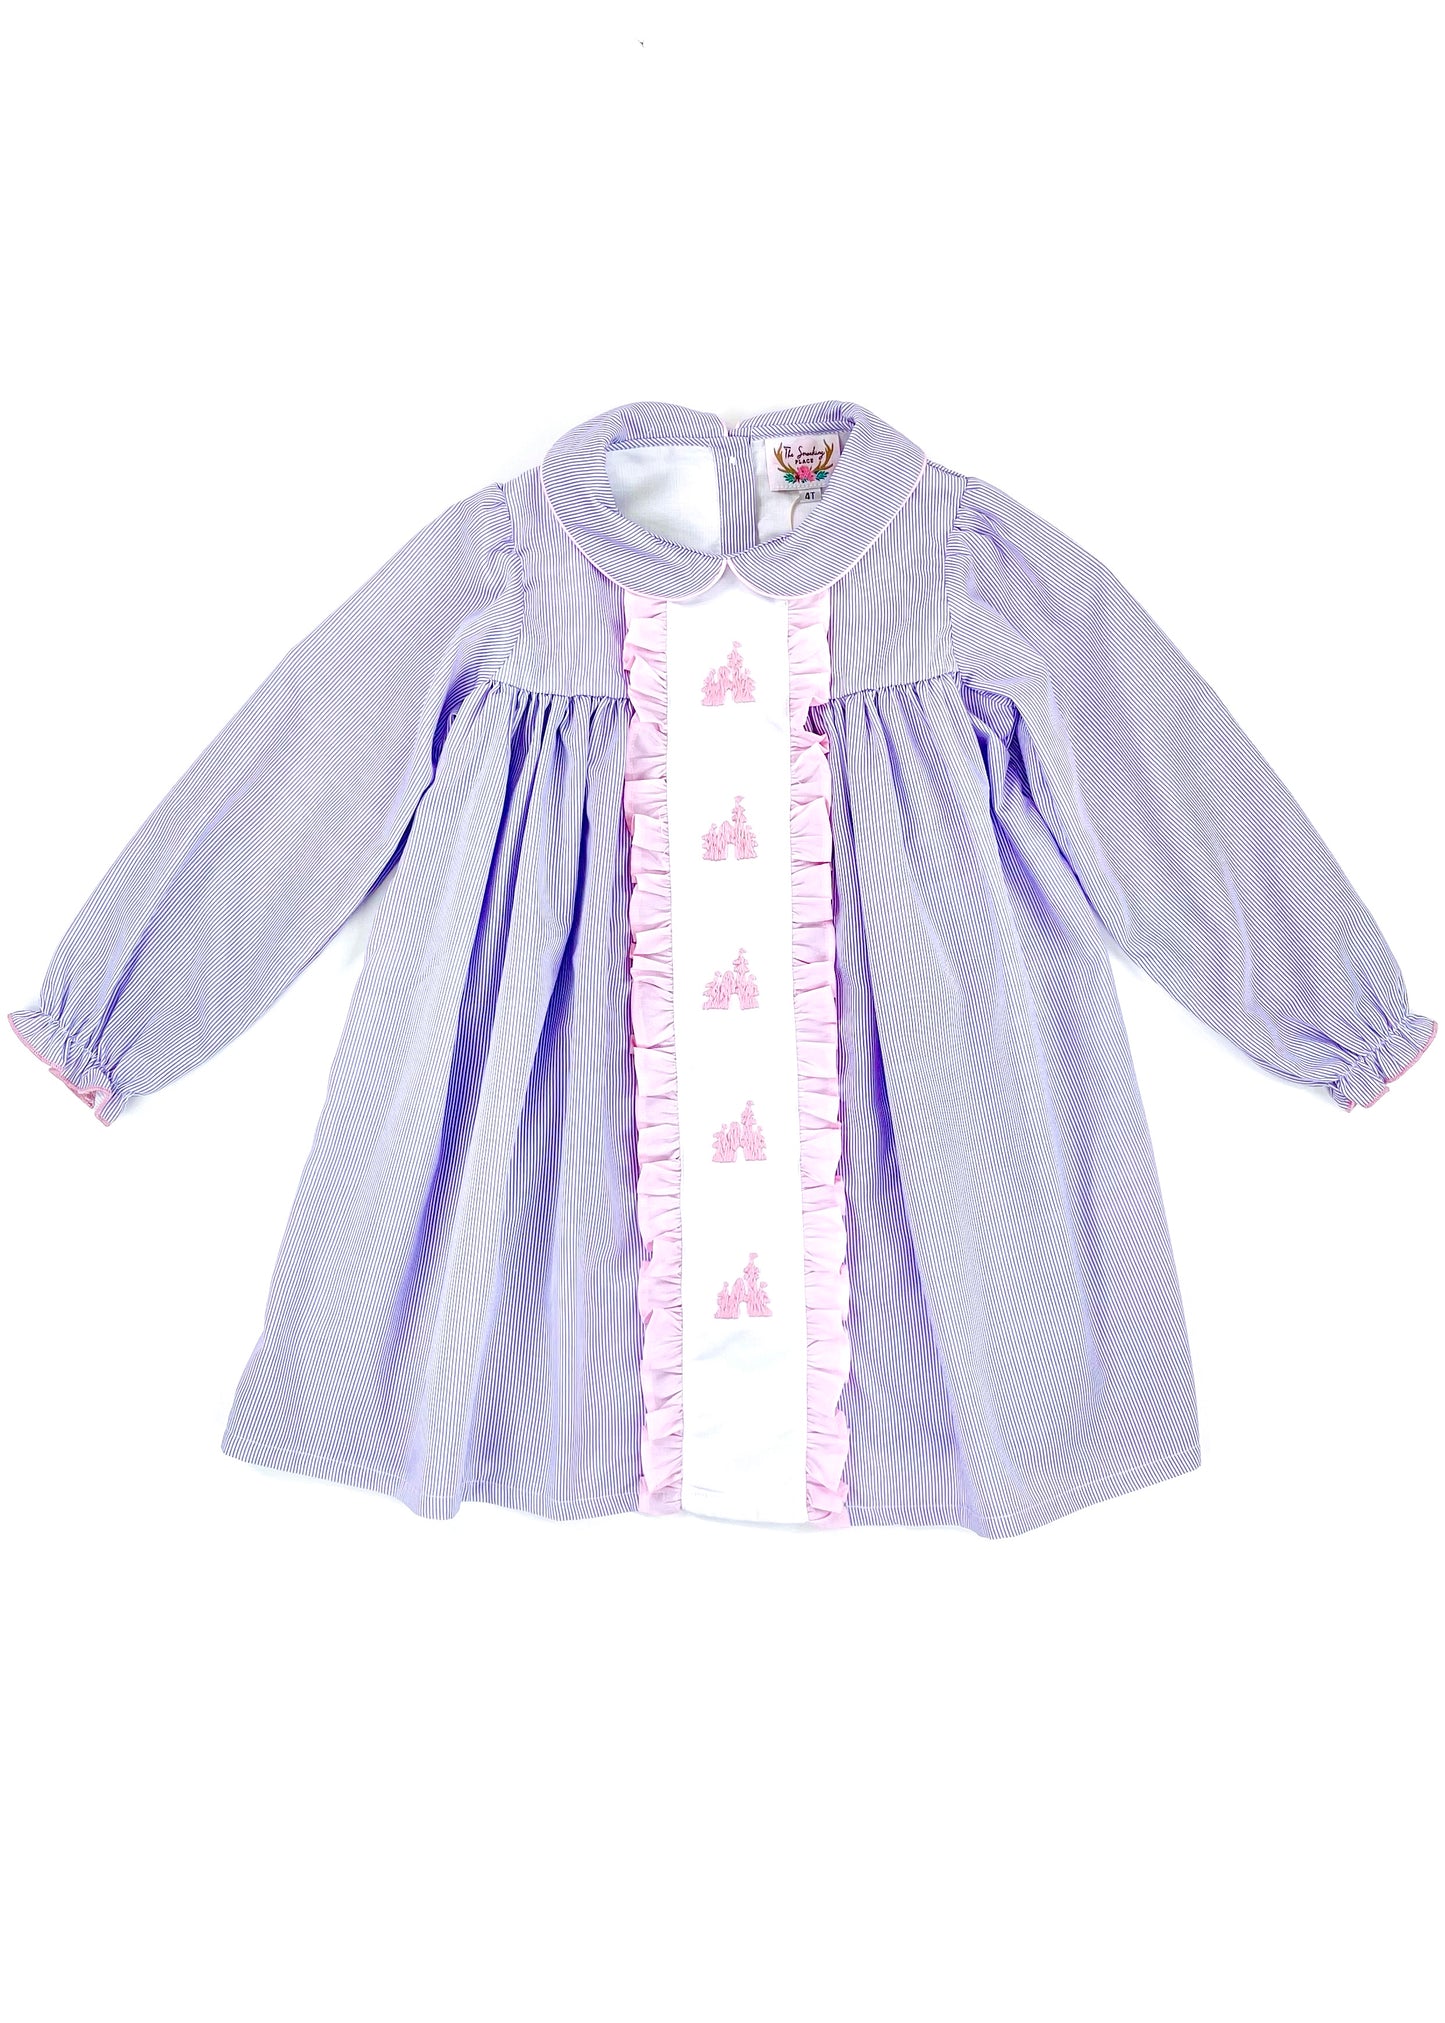 Castle Embroidered Lavender Pinstripe Ruffle Dress